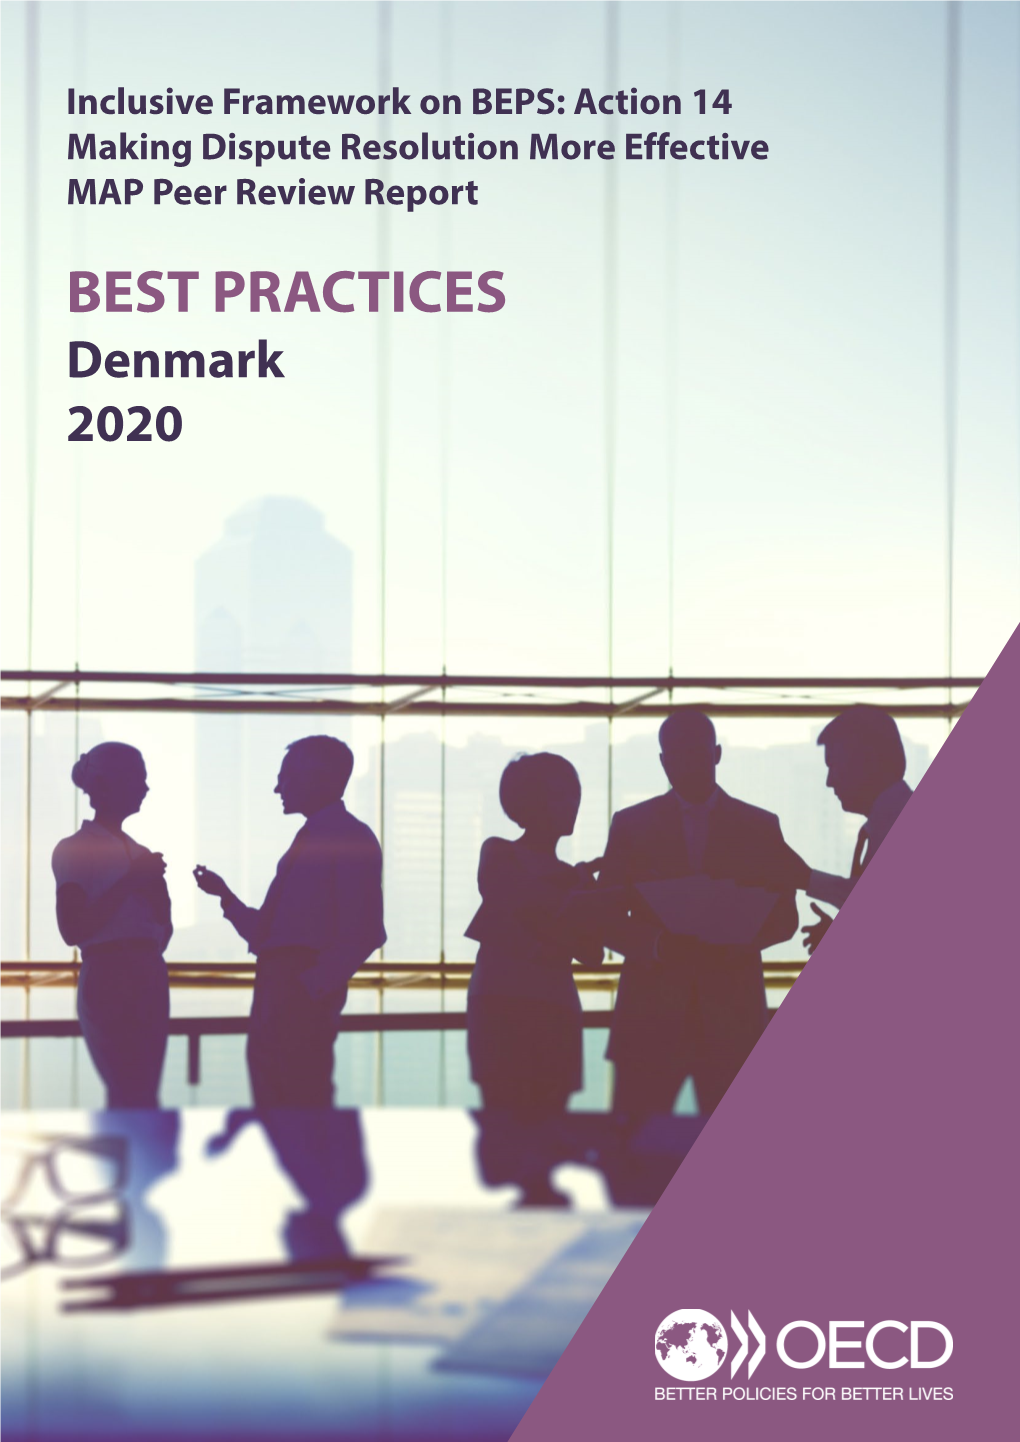 BEPS Action 14 Peer Review: Best Practices